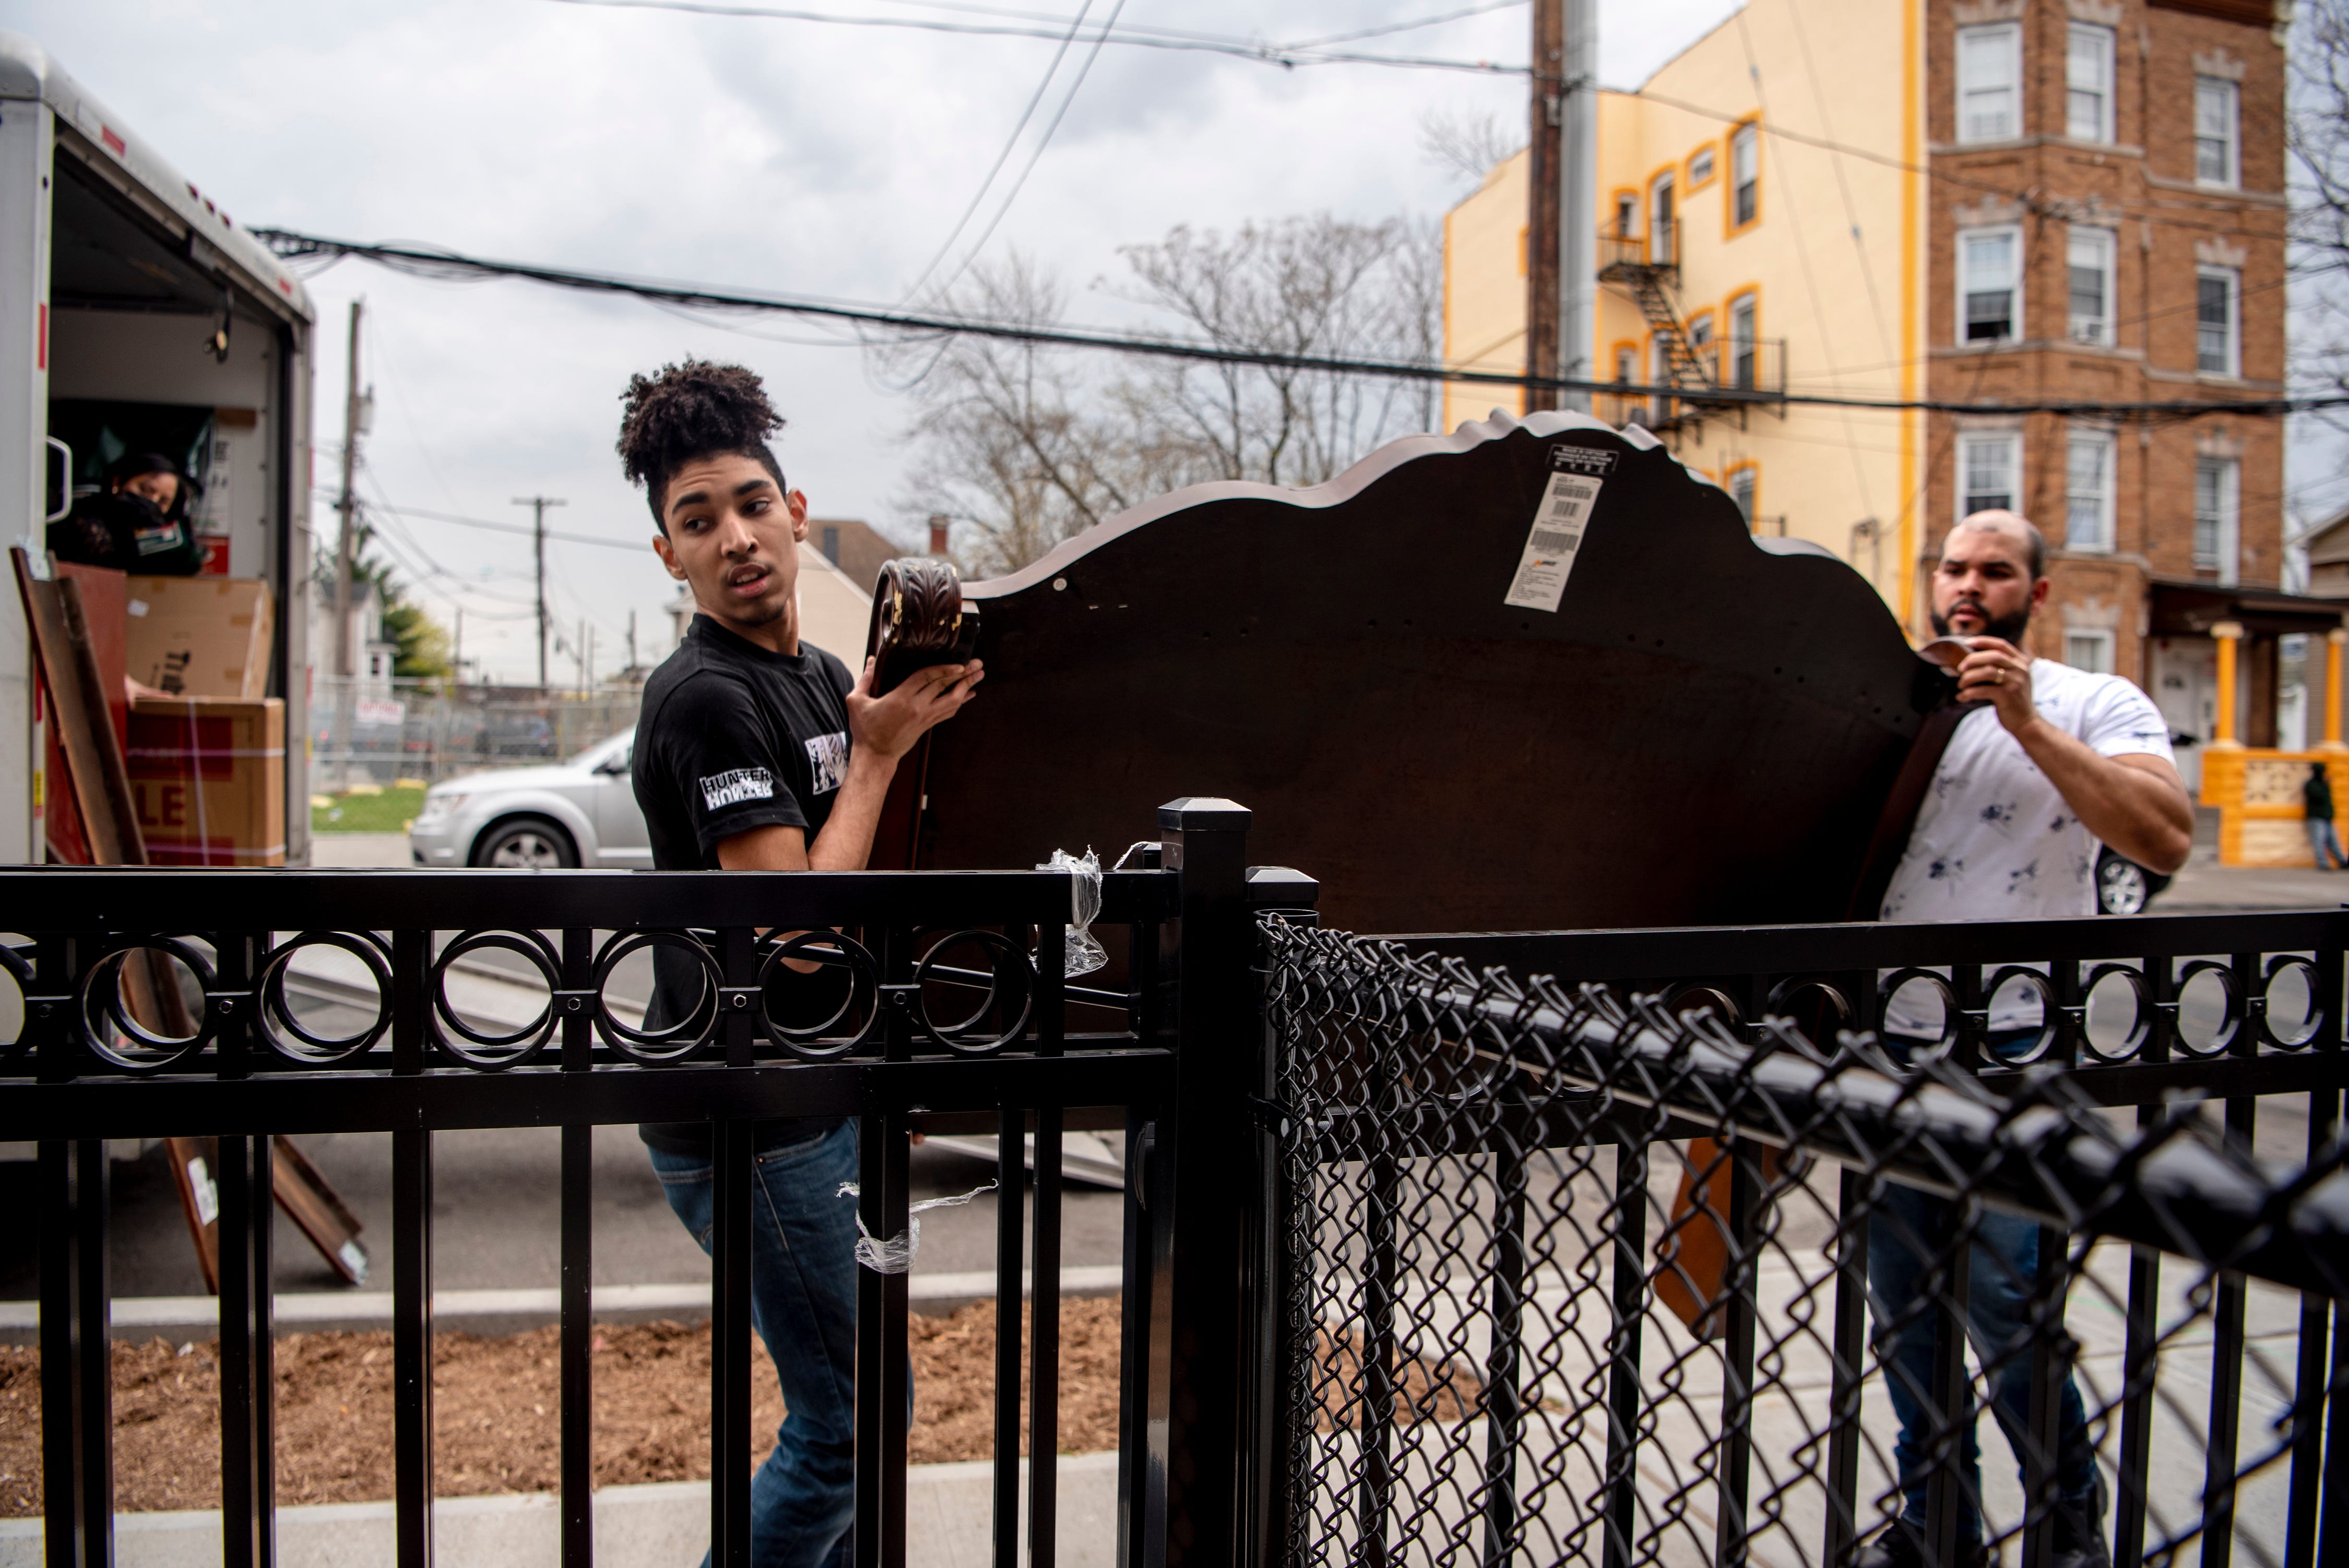 Carlos De Los Santos, 17 and his stepfather Ronny Brito unpack the moving van outside of the family's new Habitat for Humanity home on Hamilton Ave. in Paterson on April 9, 2021.